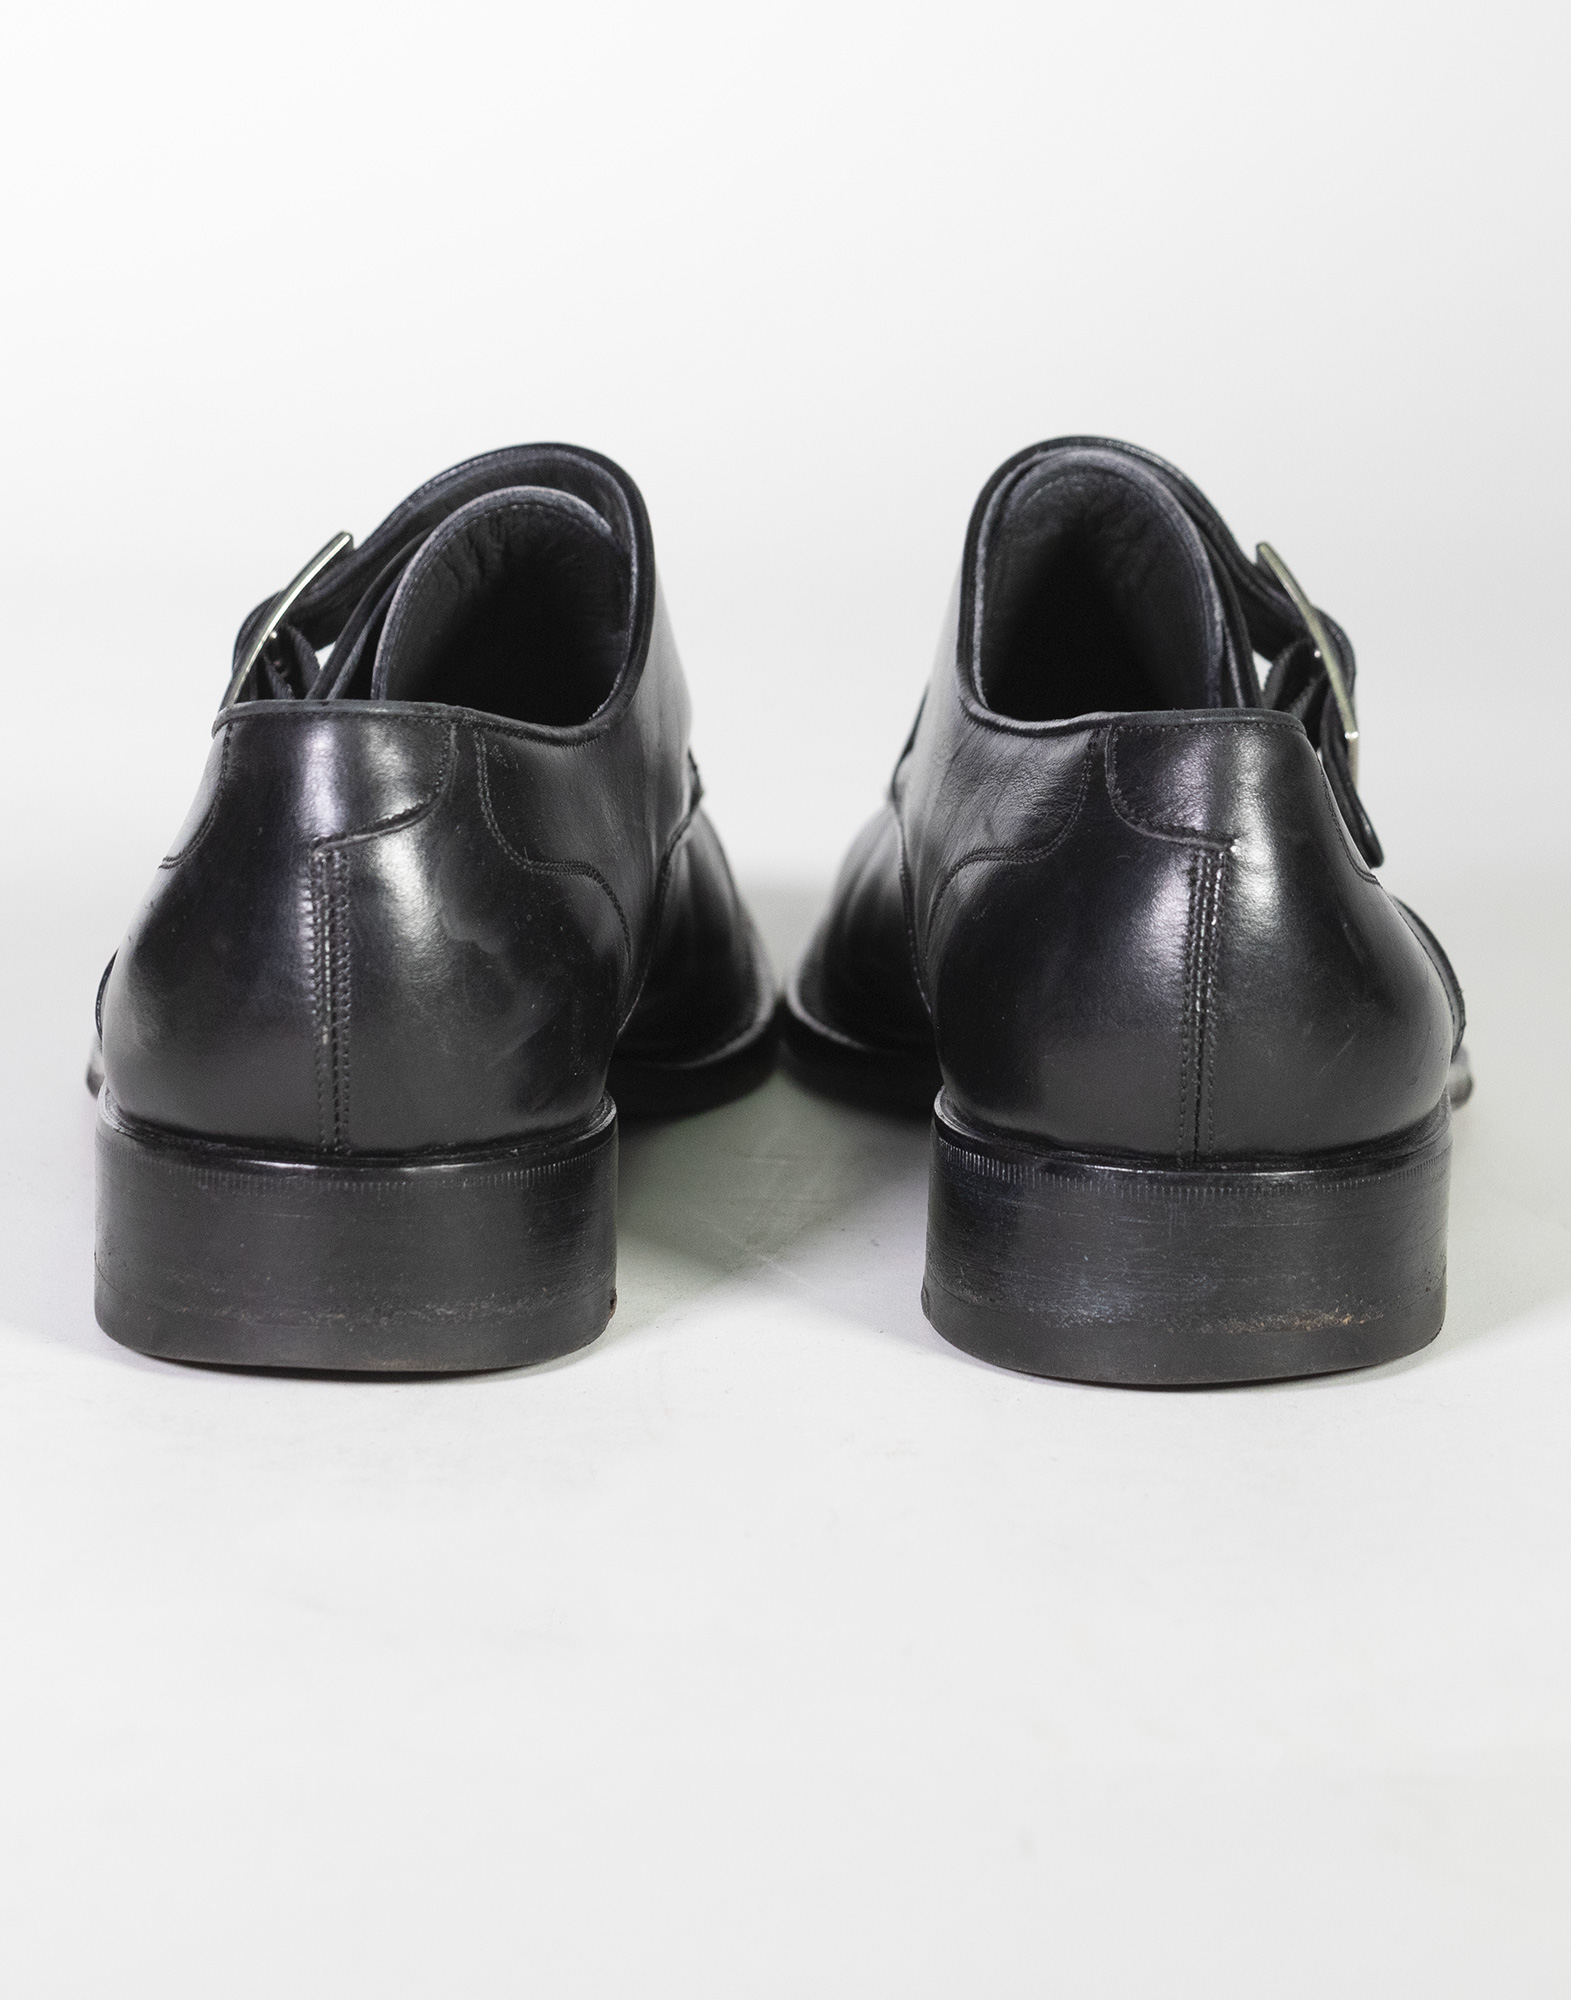 Bally - Leather man shoes